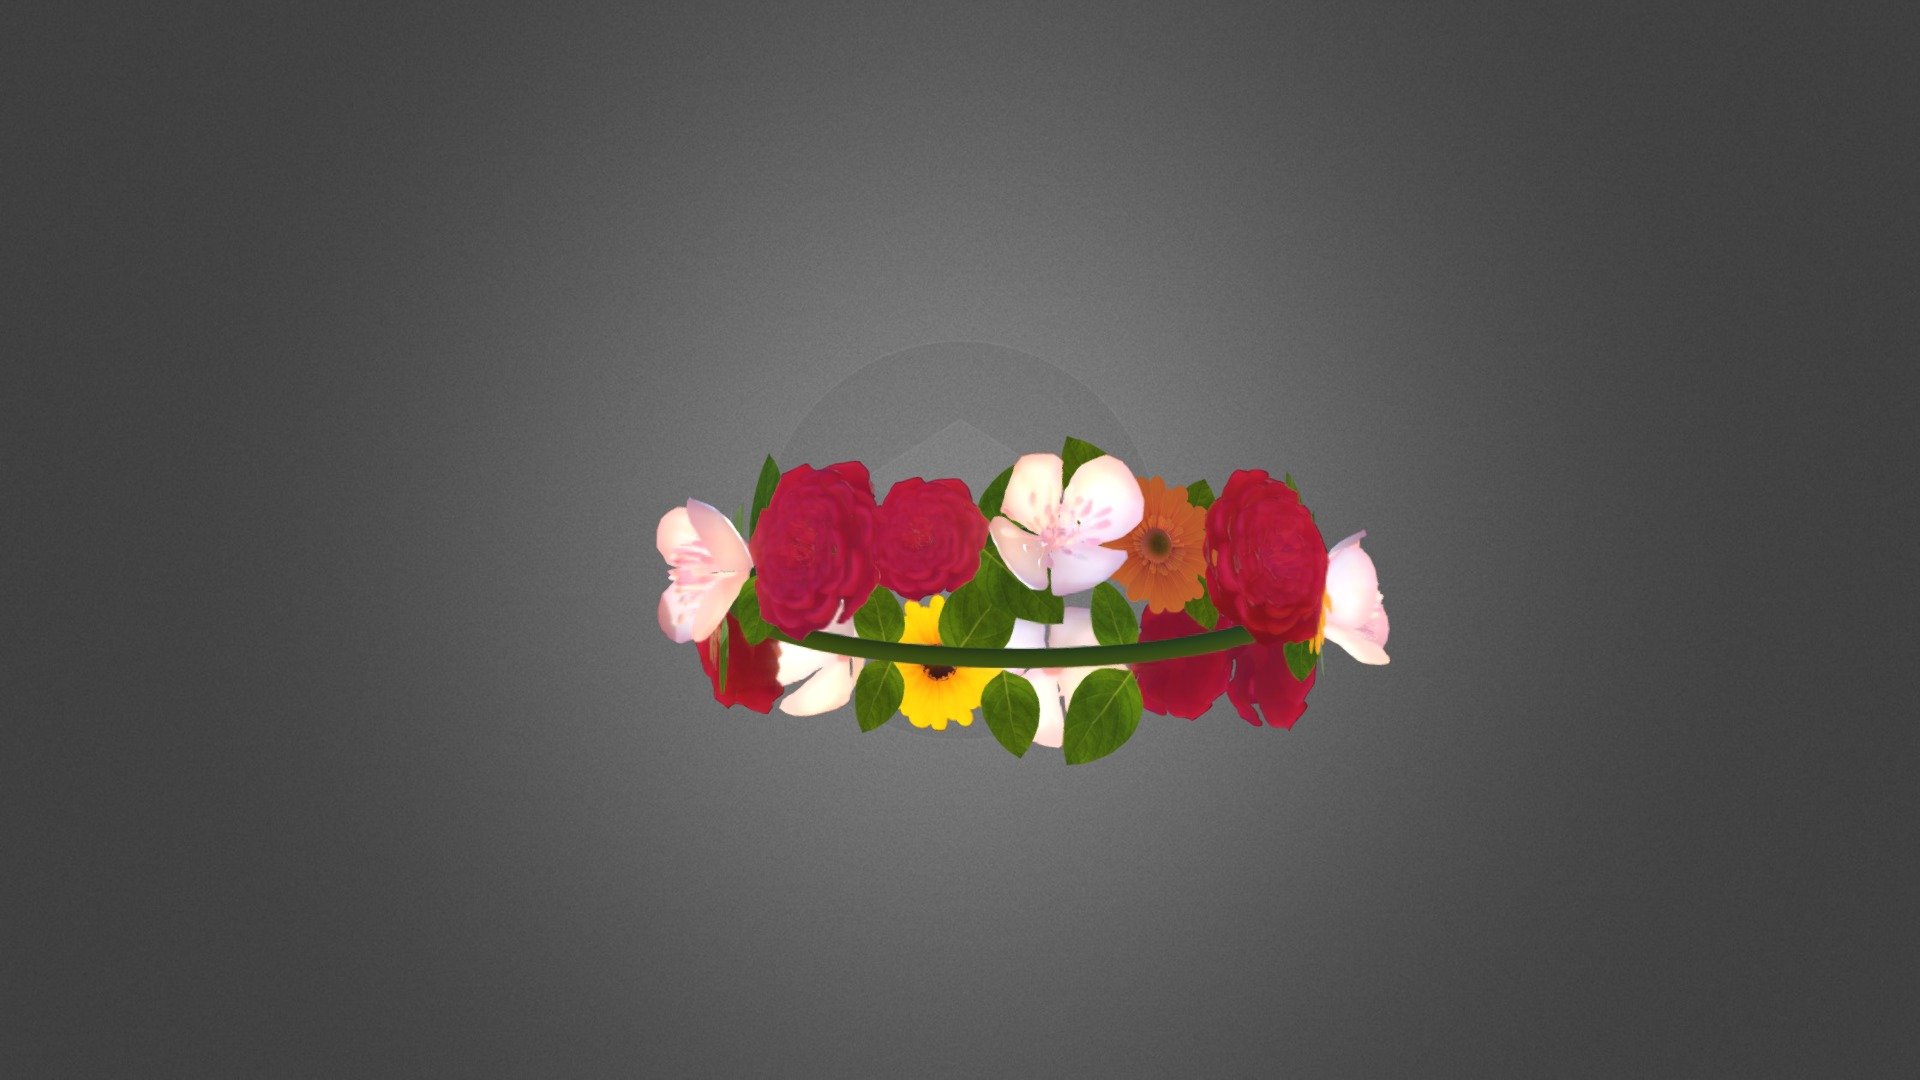 Tropical flower crown made in Maya and textures in Photoshop - Flower Crown - 3D model by Queen_Shinigami (@Fenil.Shah) 3d model